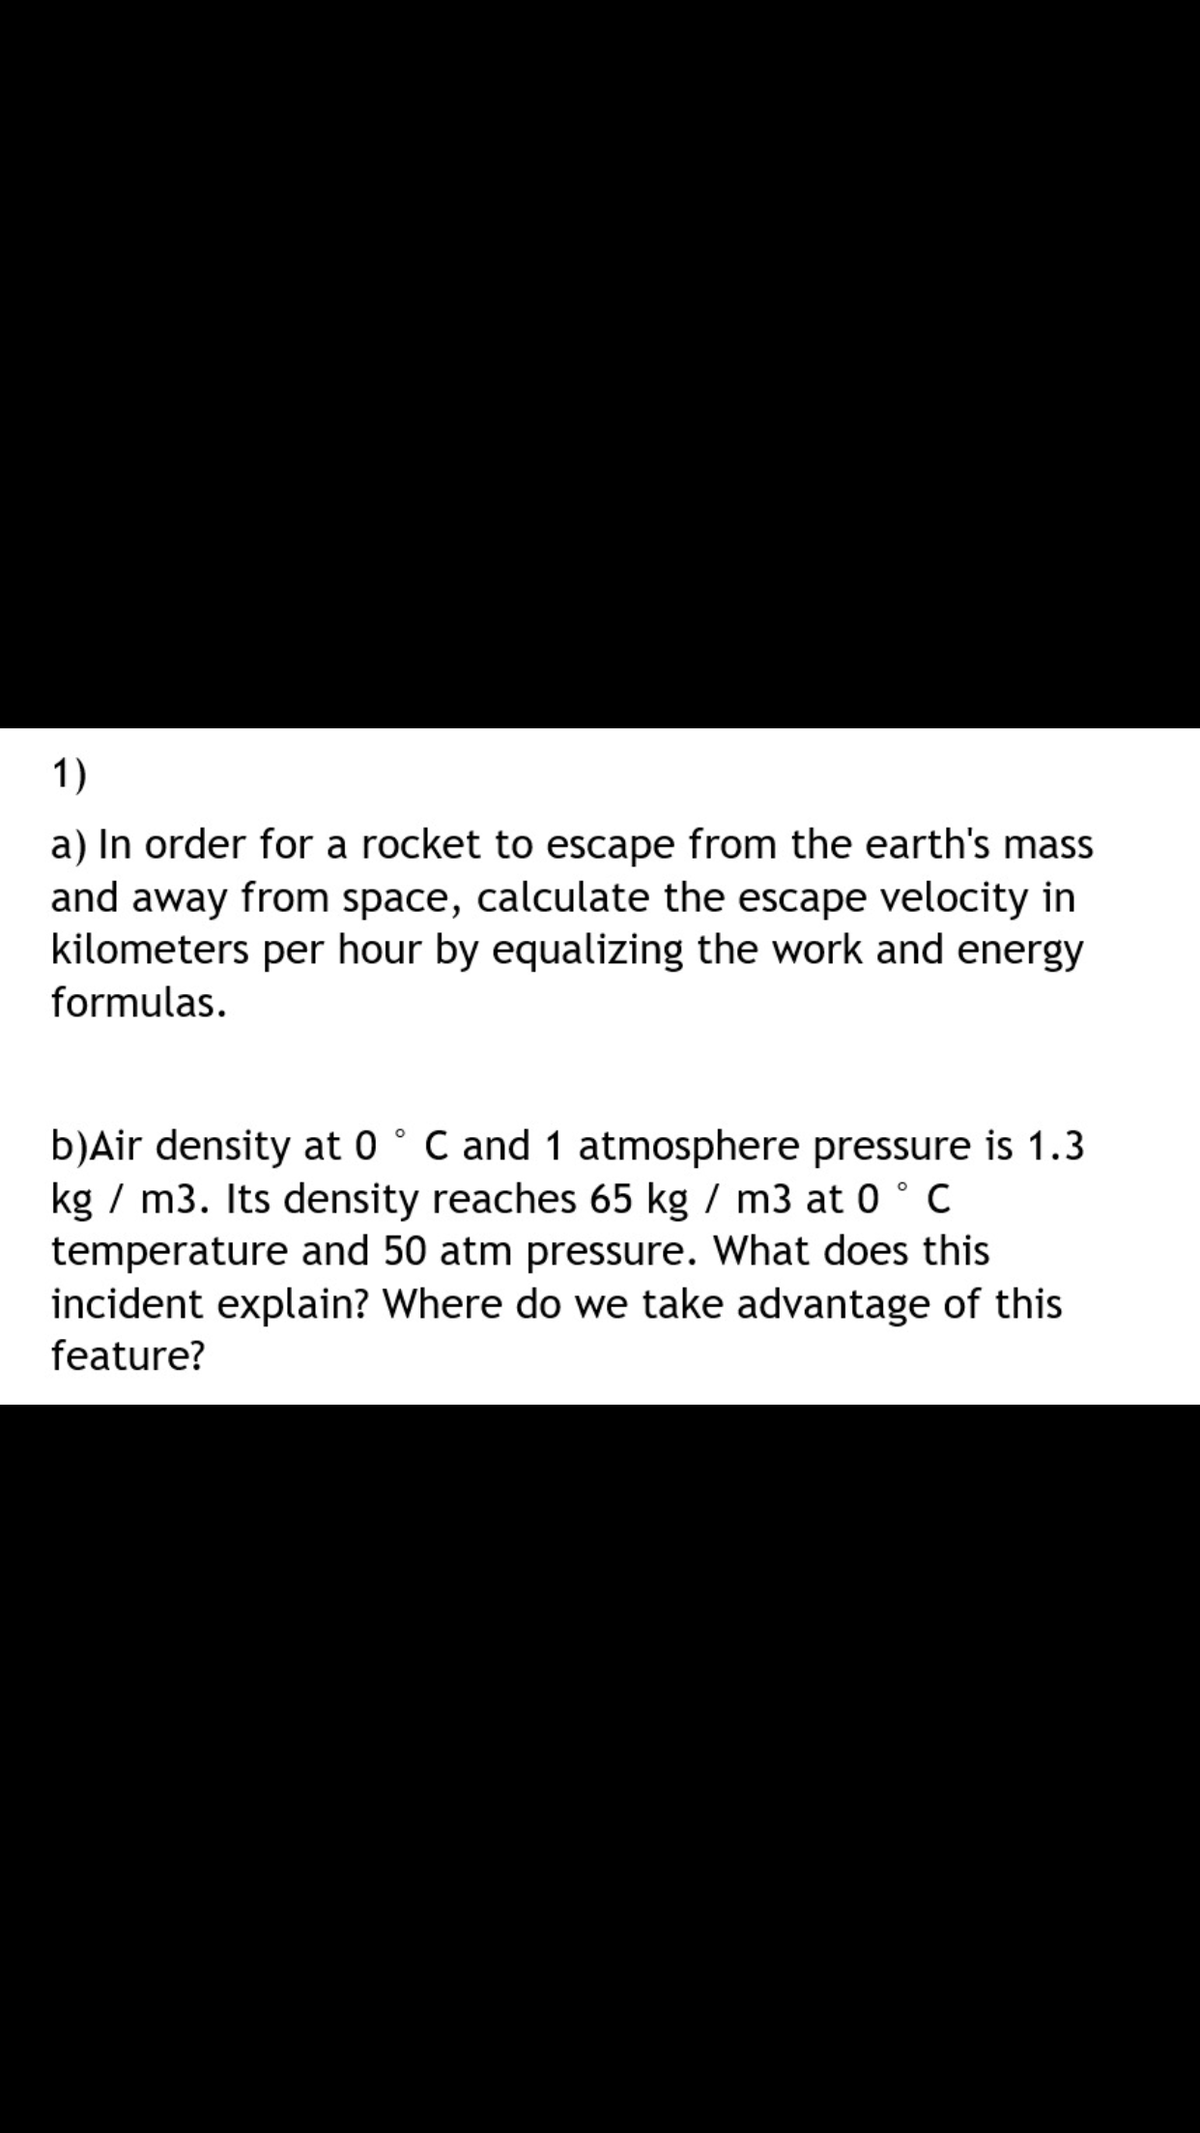 1)
a) In order for a rocket to escape from the earth's mass
and away from space, calculate the escape velocity in
kilometers per hour by equalizing the work and energy
formulas.
b)Air density at 0 ° C and 1 atmosphere pressure is 1.3
kg / m3. Its density reaches 65 kg / m3 at 0 ° C
temperature and 50 atm pressure. What does this
incident explain? Where do we take advantage of this
feature?
